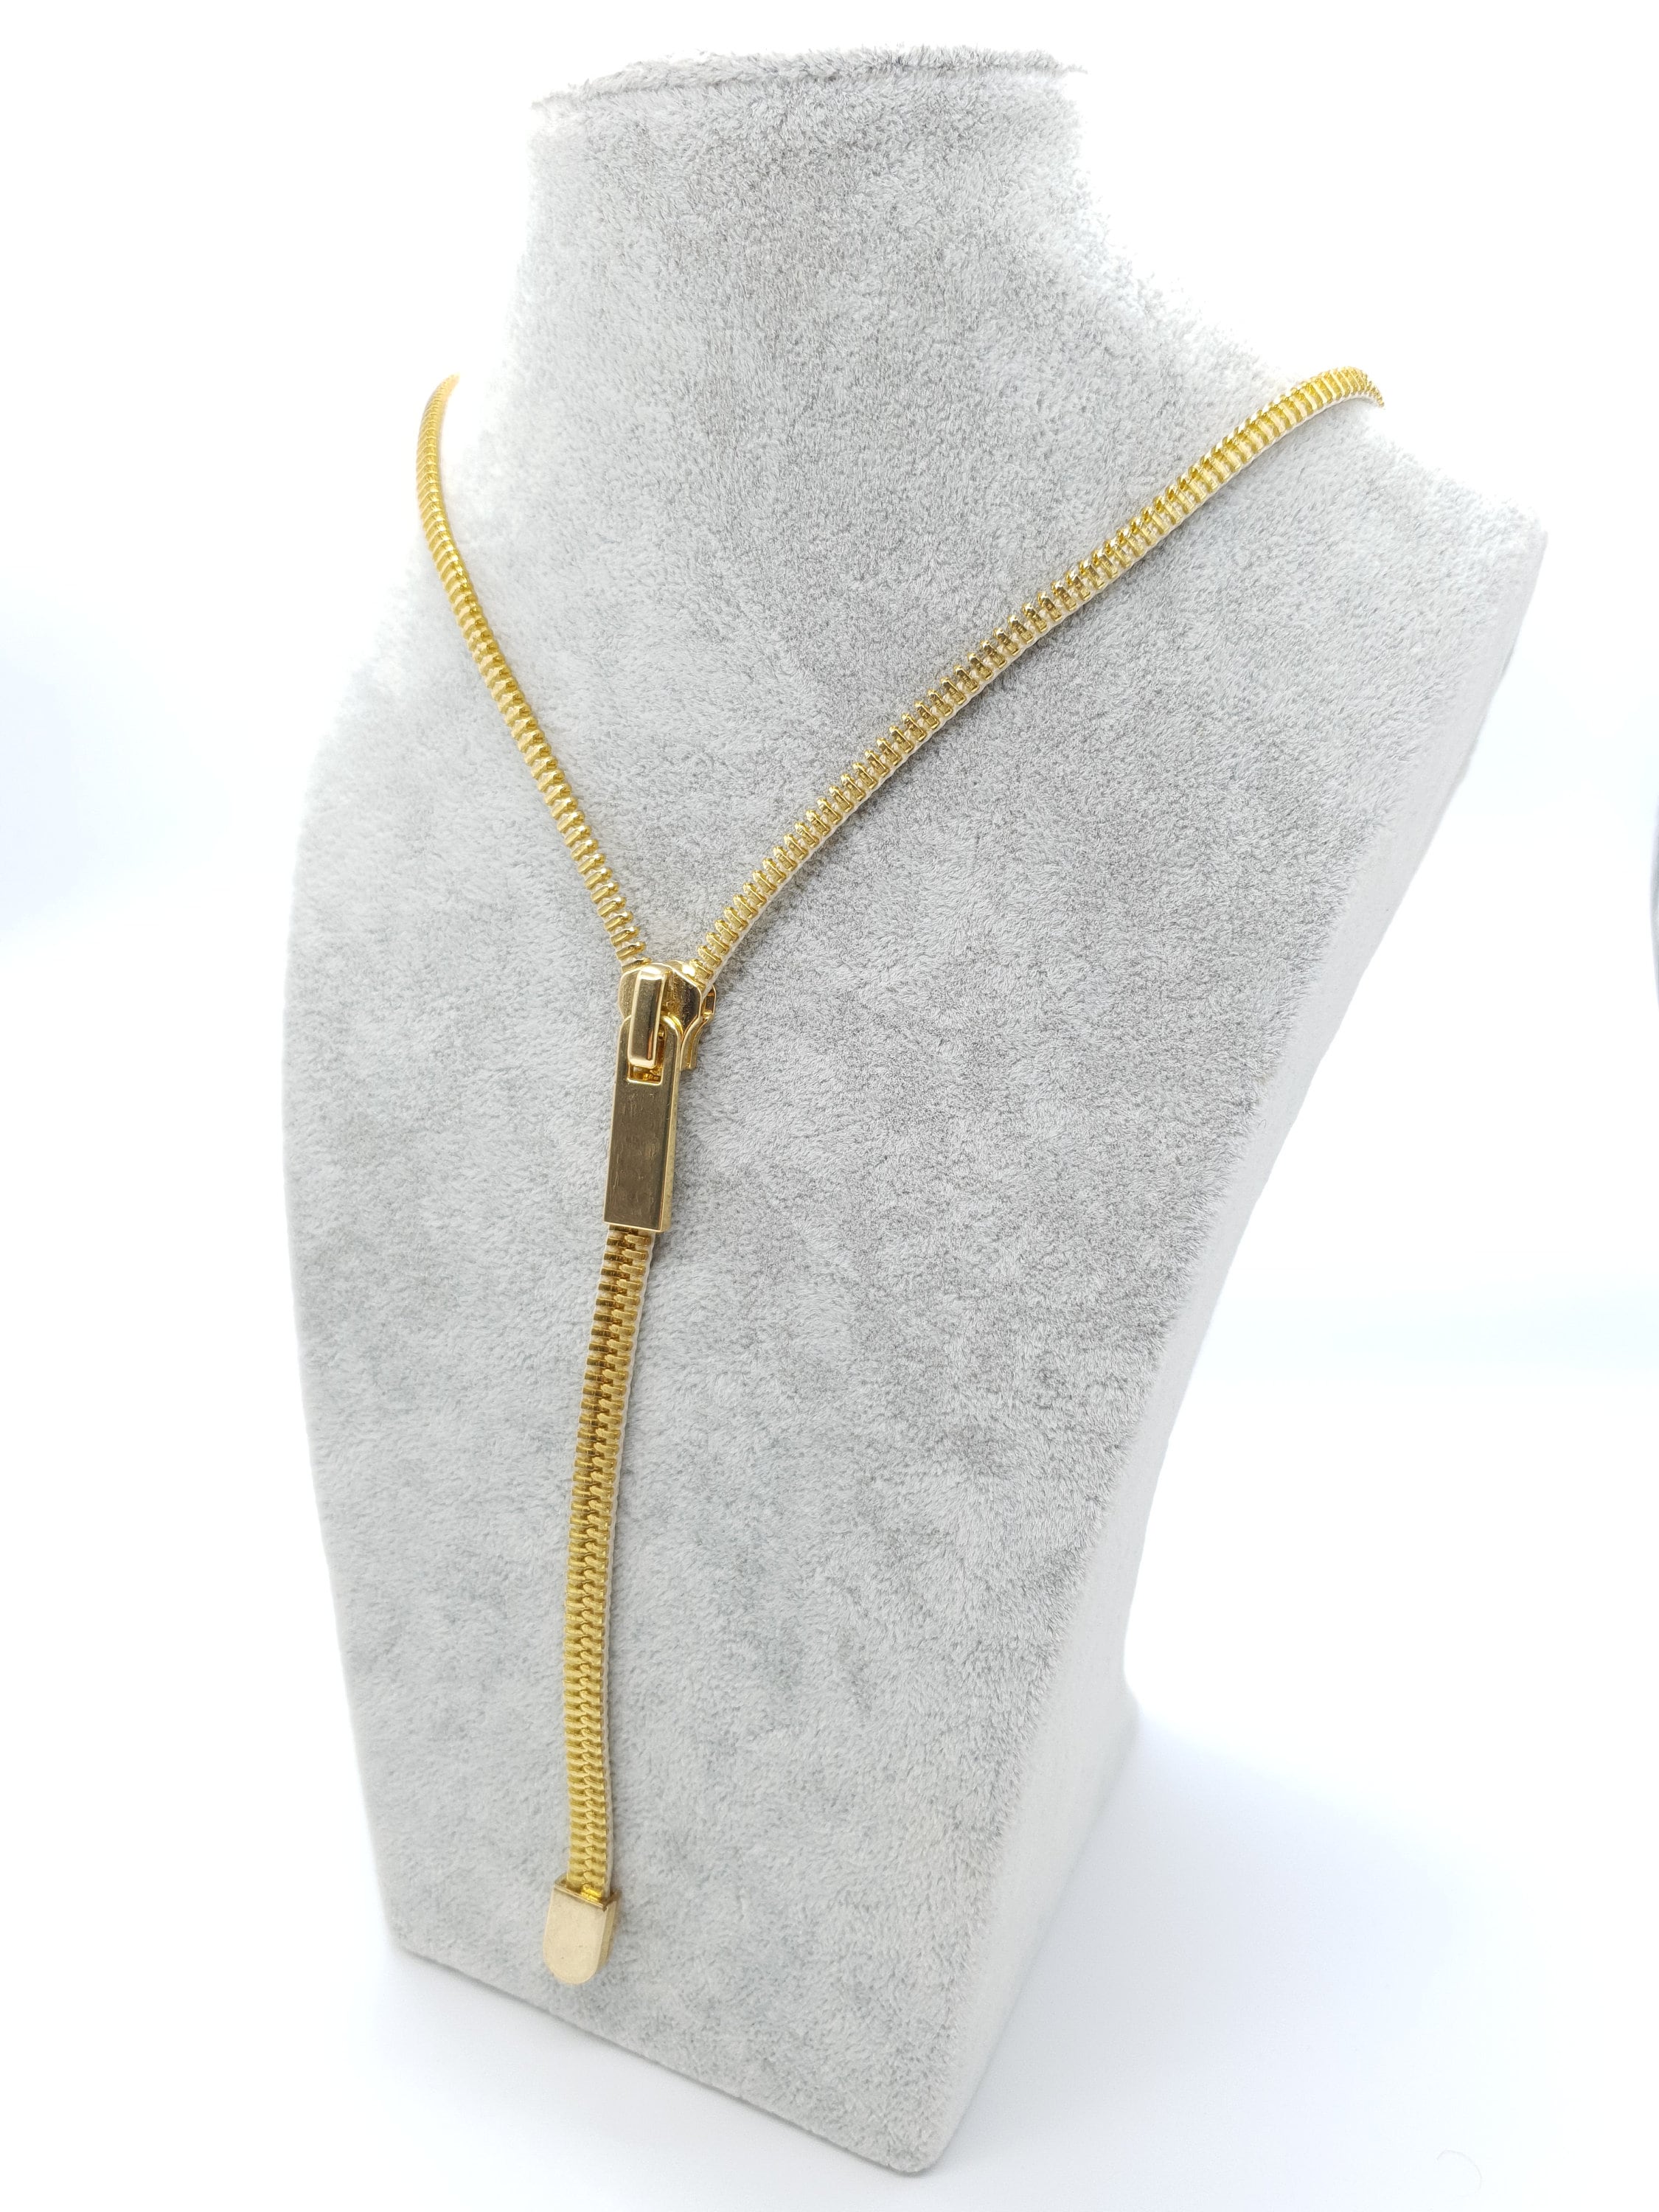 Vintage Gold Tone Adjustable Zipper Necklace - Makes a great Gift!